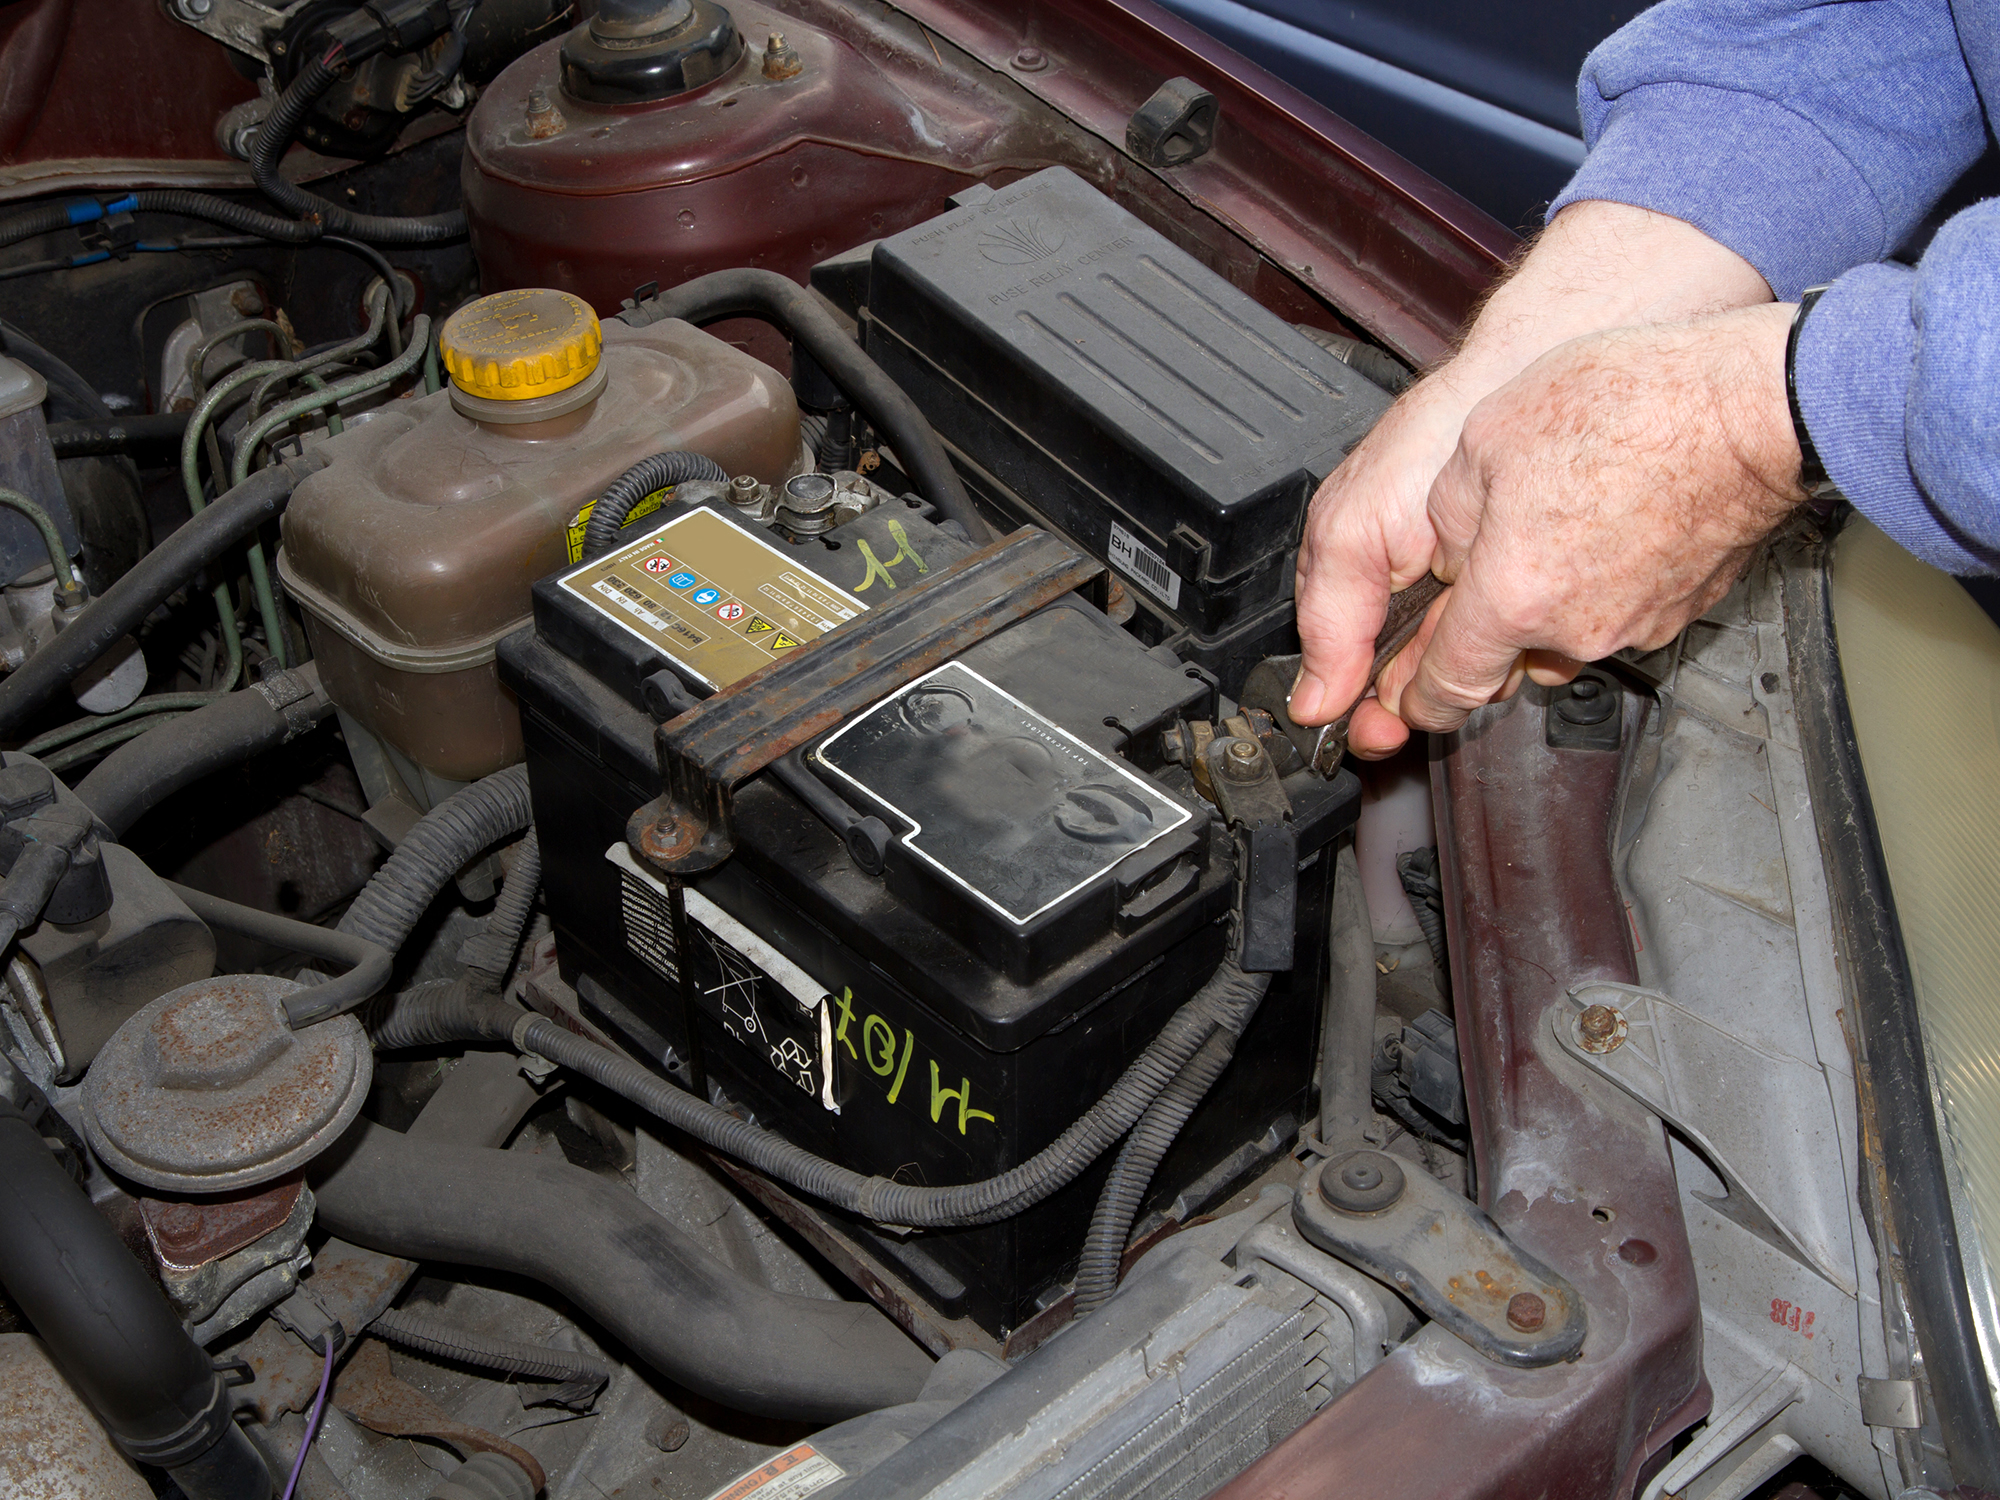 Today’s the day you learn to install a car battery